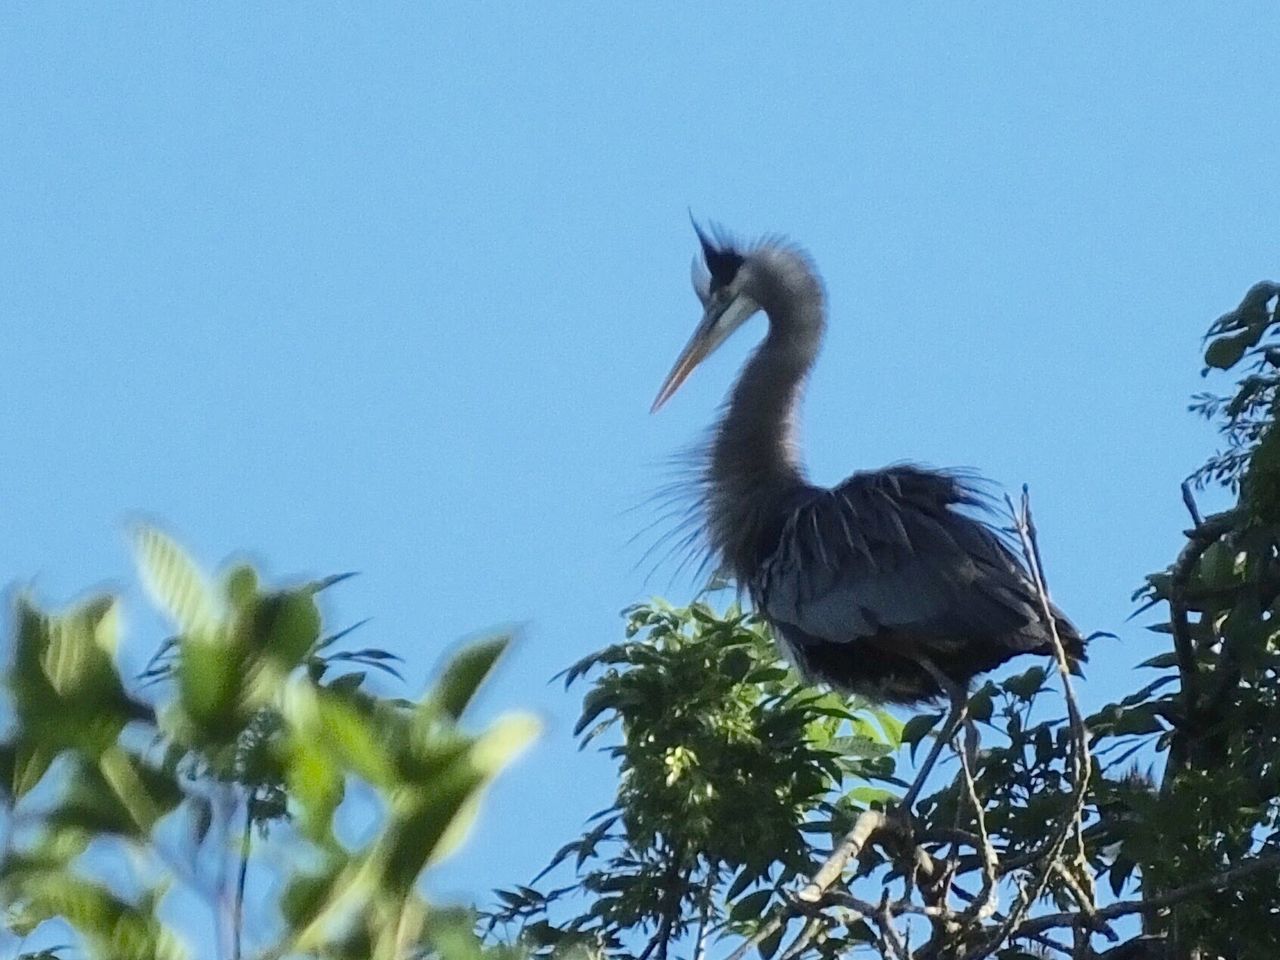 LOW ANGLE VIEW OF BIRD PERCHING ON TREE AGAINST BLUE SKY